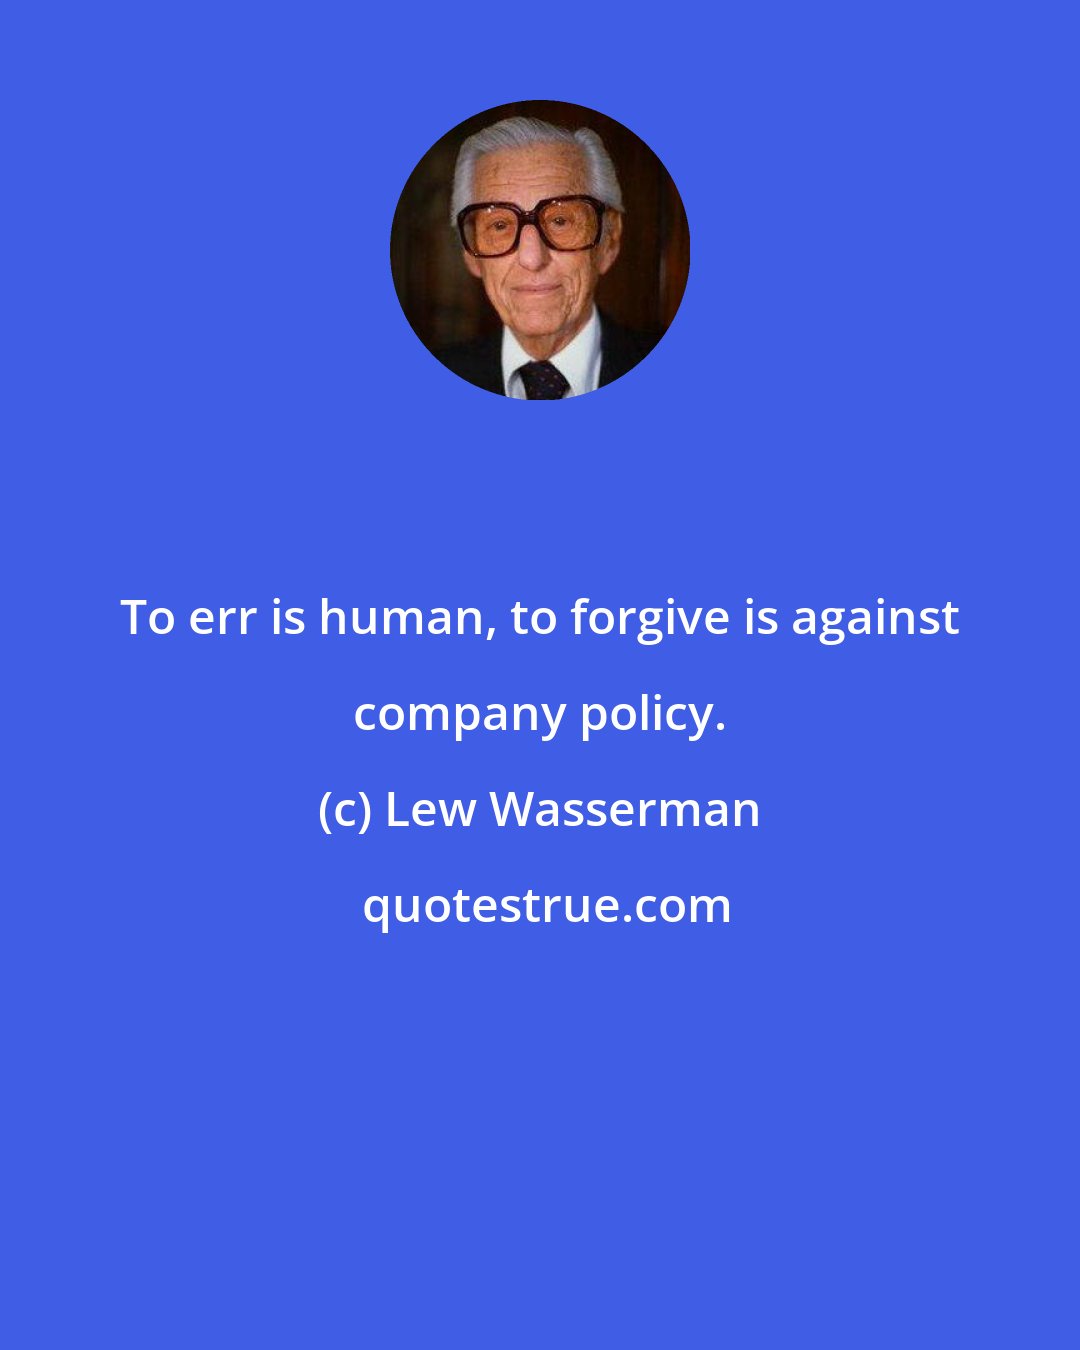 Lew Wasserman: To err is human, to forgive is against company policy.